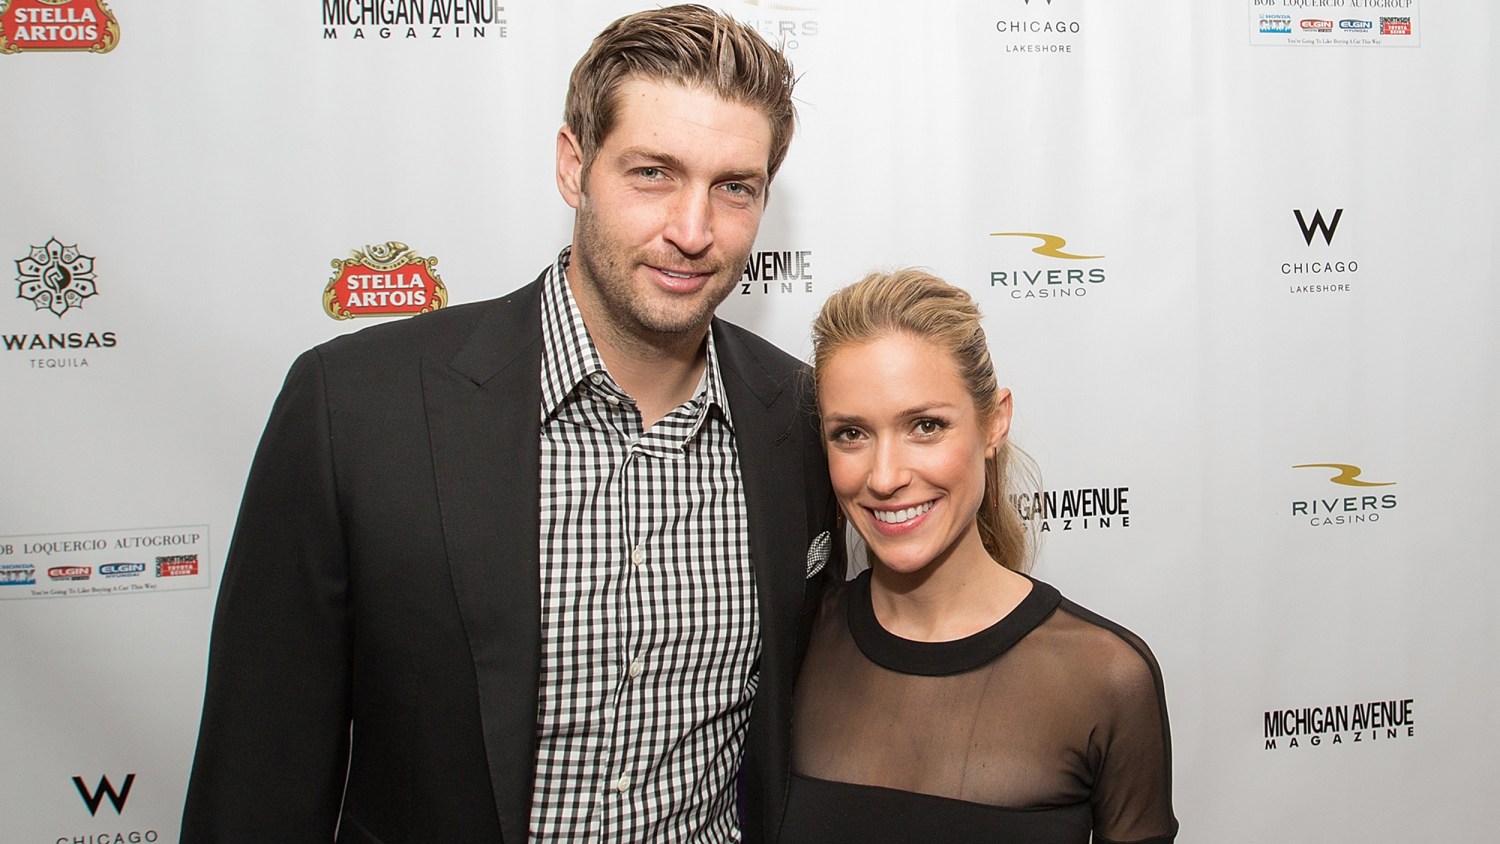 So excited for my man': Kristin Cavallari cheers on Jay Cutler's NFL return